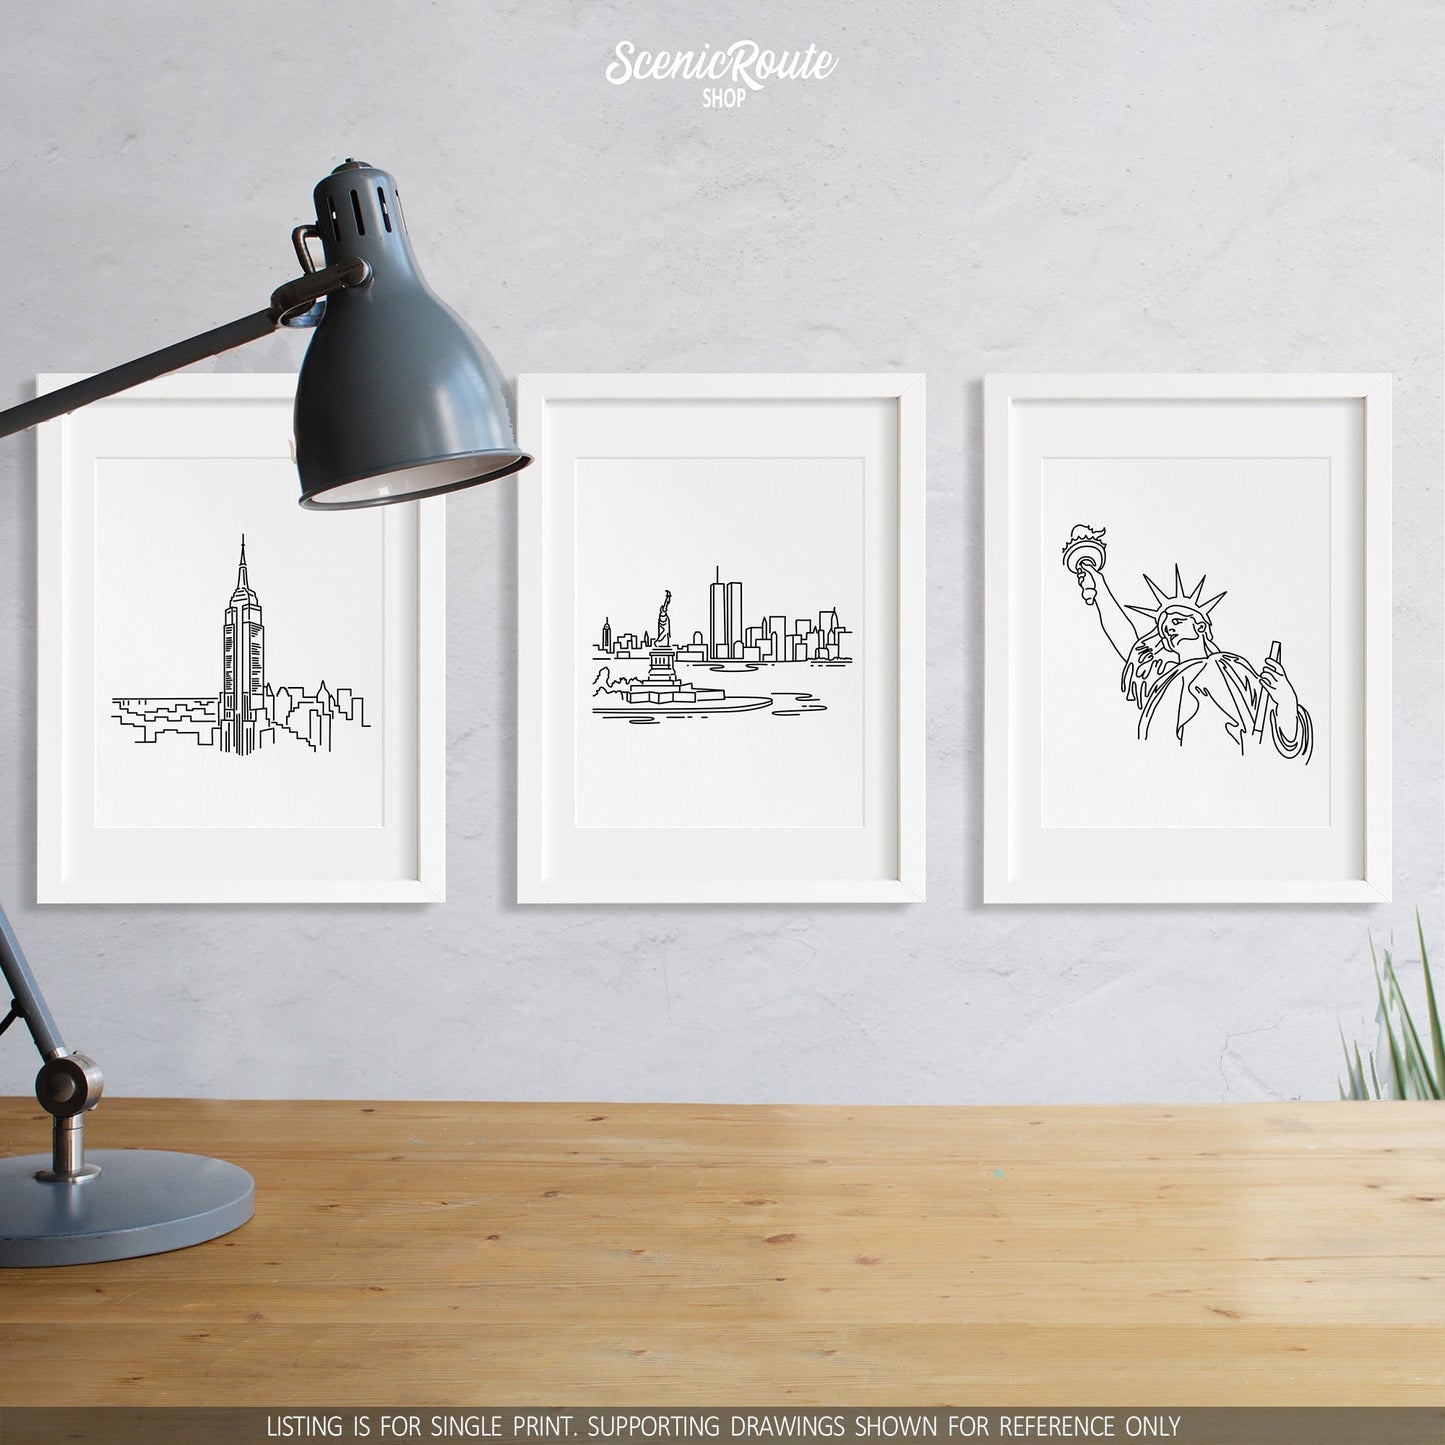 A group of three framed drawings on a wall above a desk with a lamp. The line art drawings include the Empire State Building, New York City Skyline, and Statue of Liberty